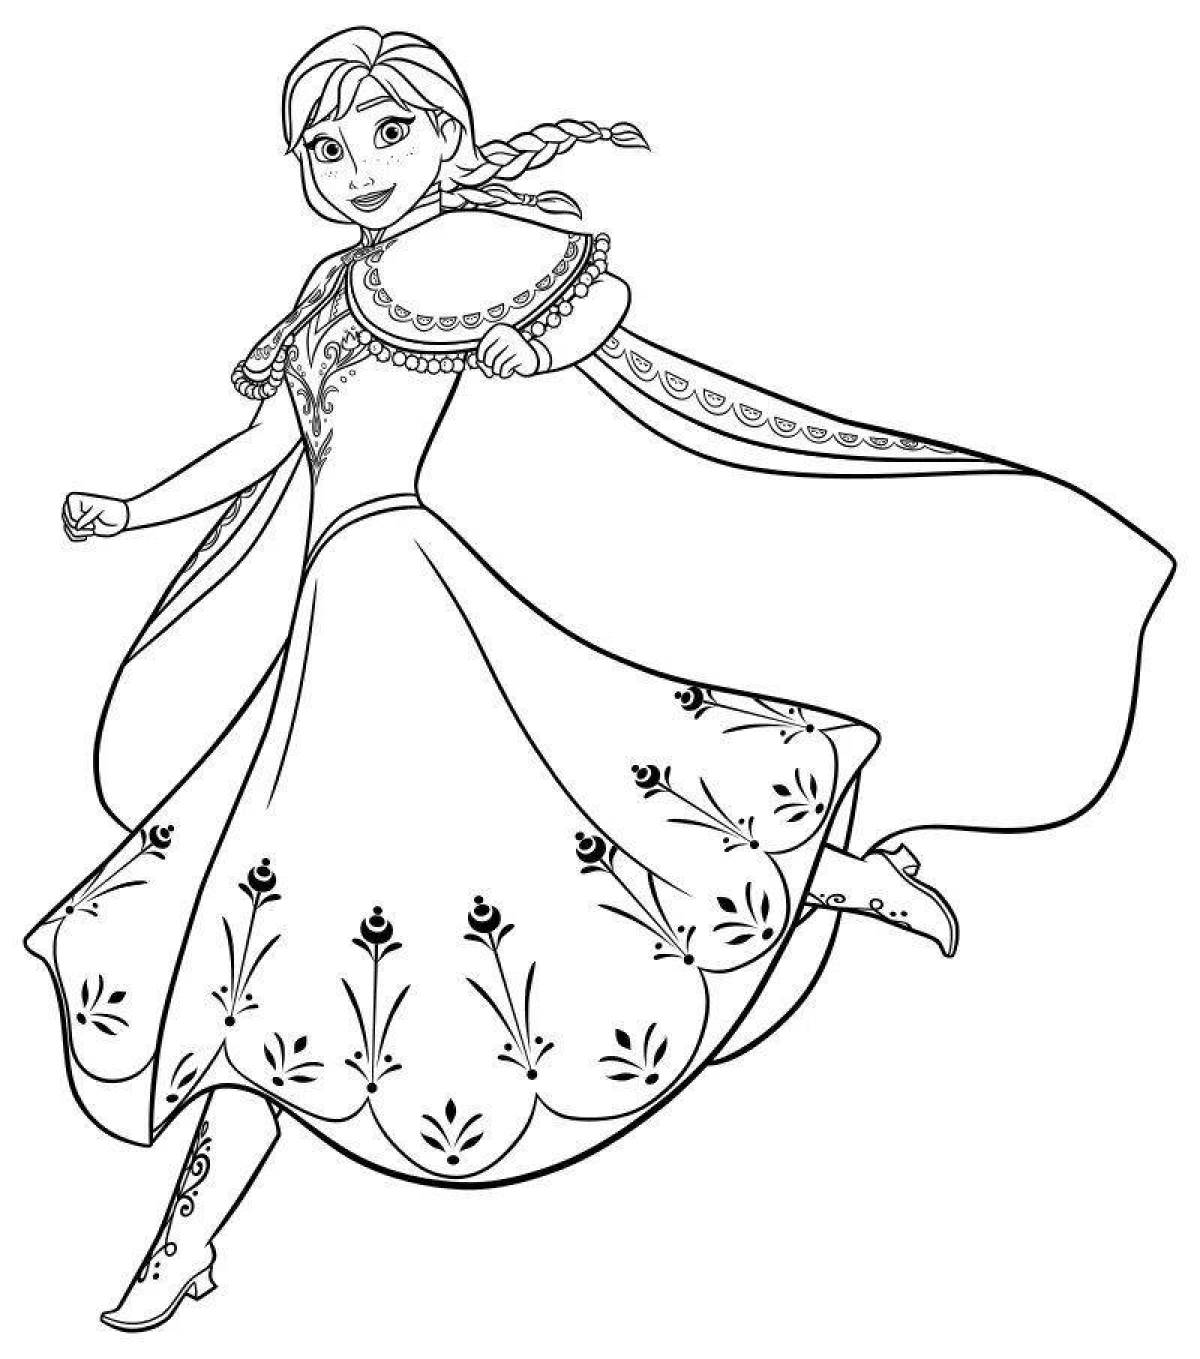 Coloring princess anna by luck